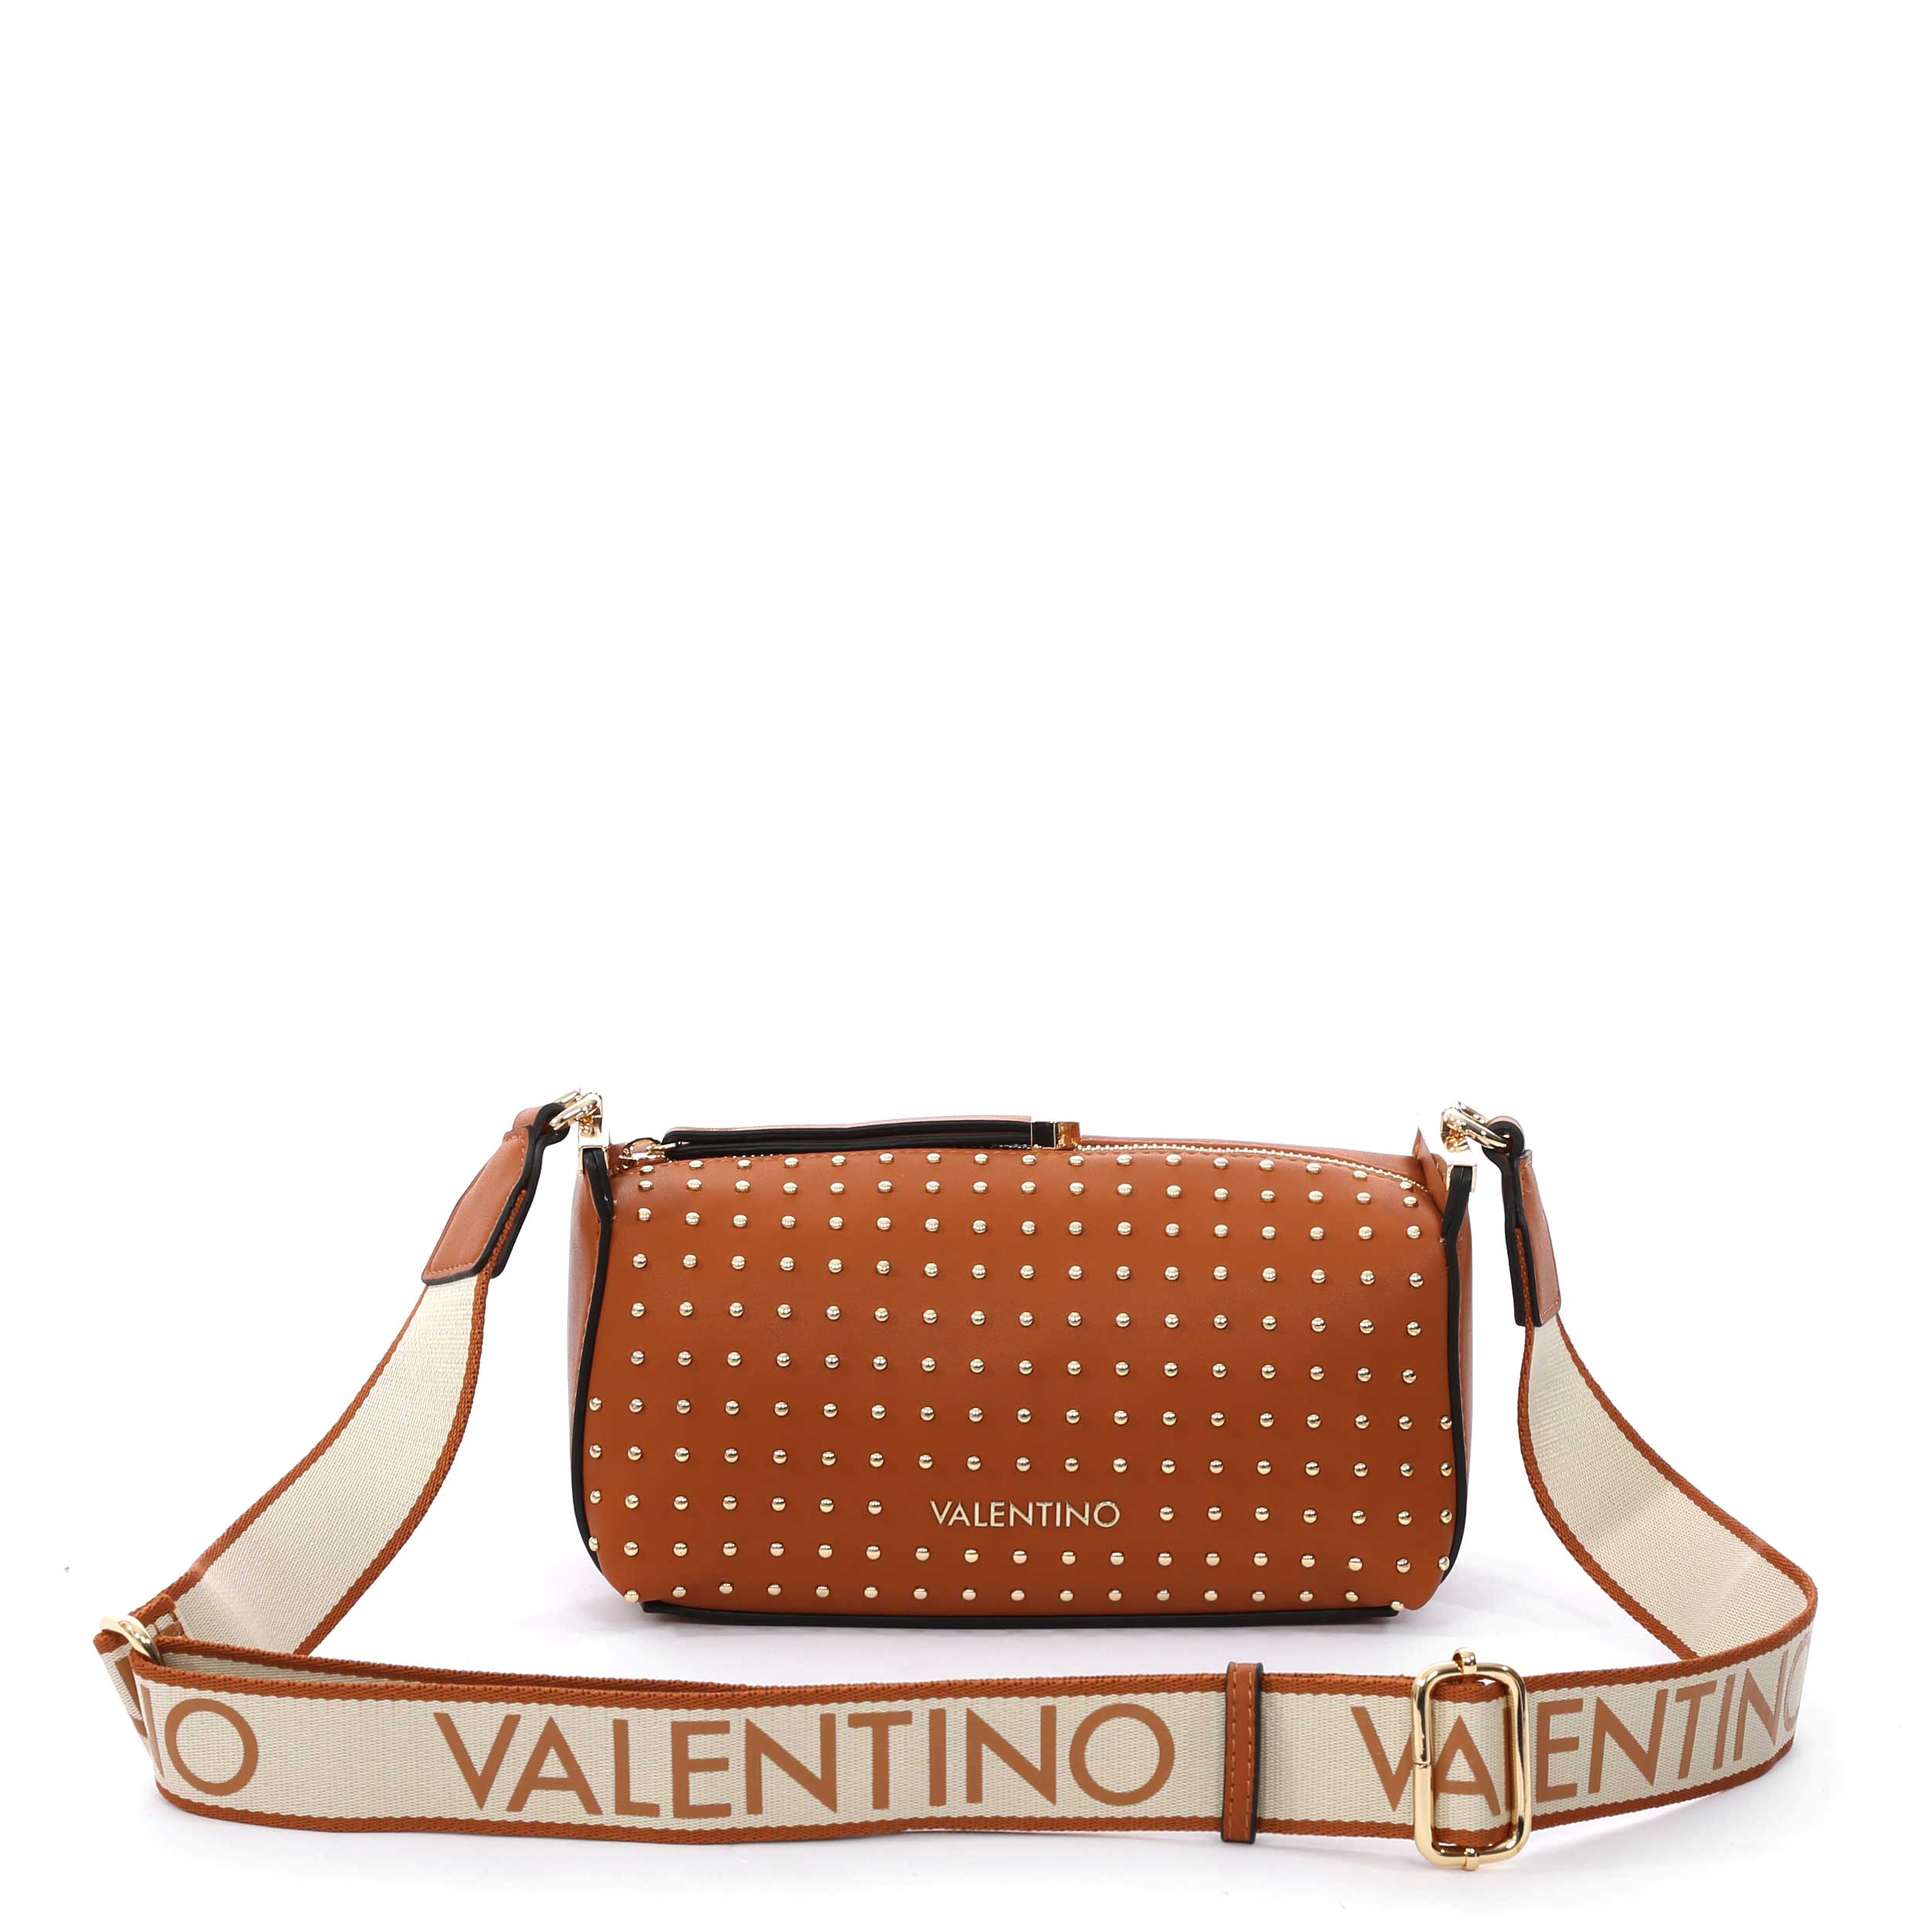 Valentino Bags Song Ladies Cross Body Bag in Cuoio Tan